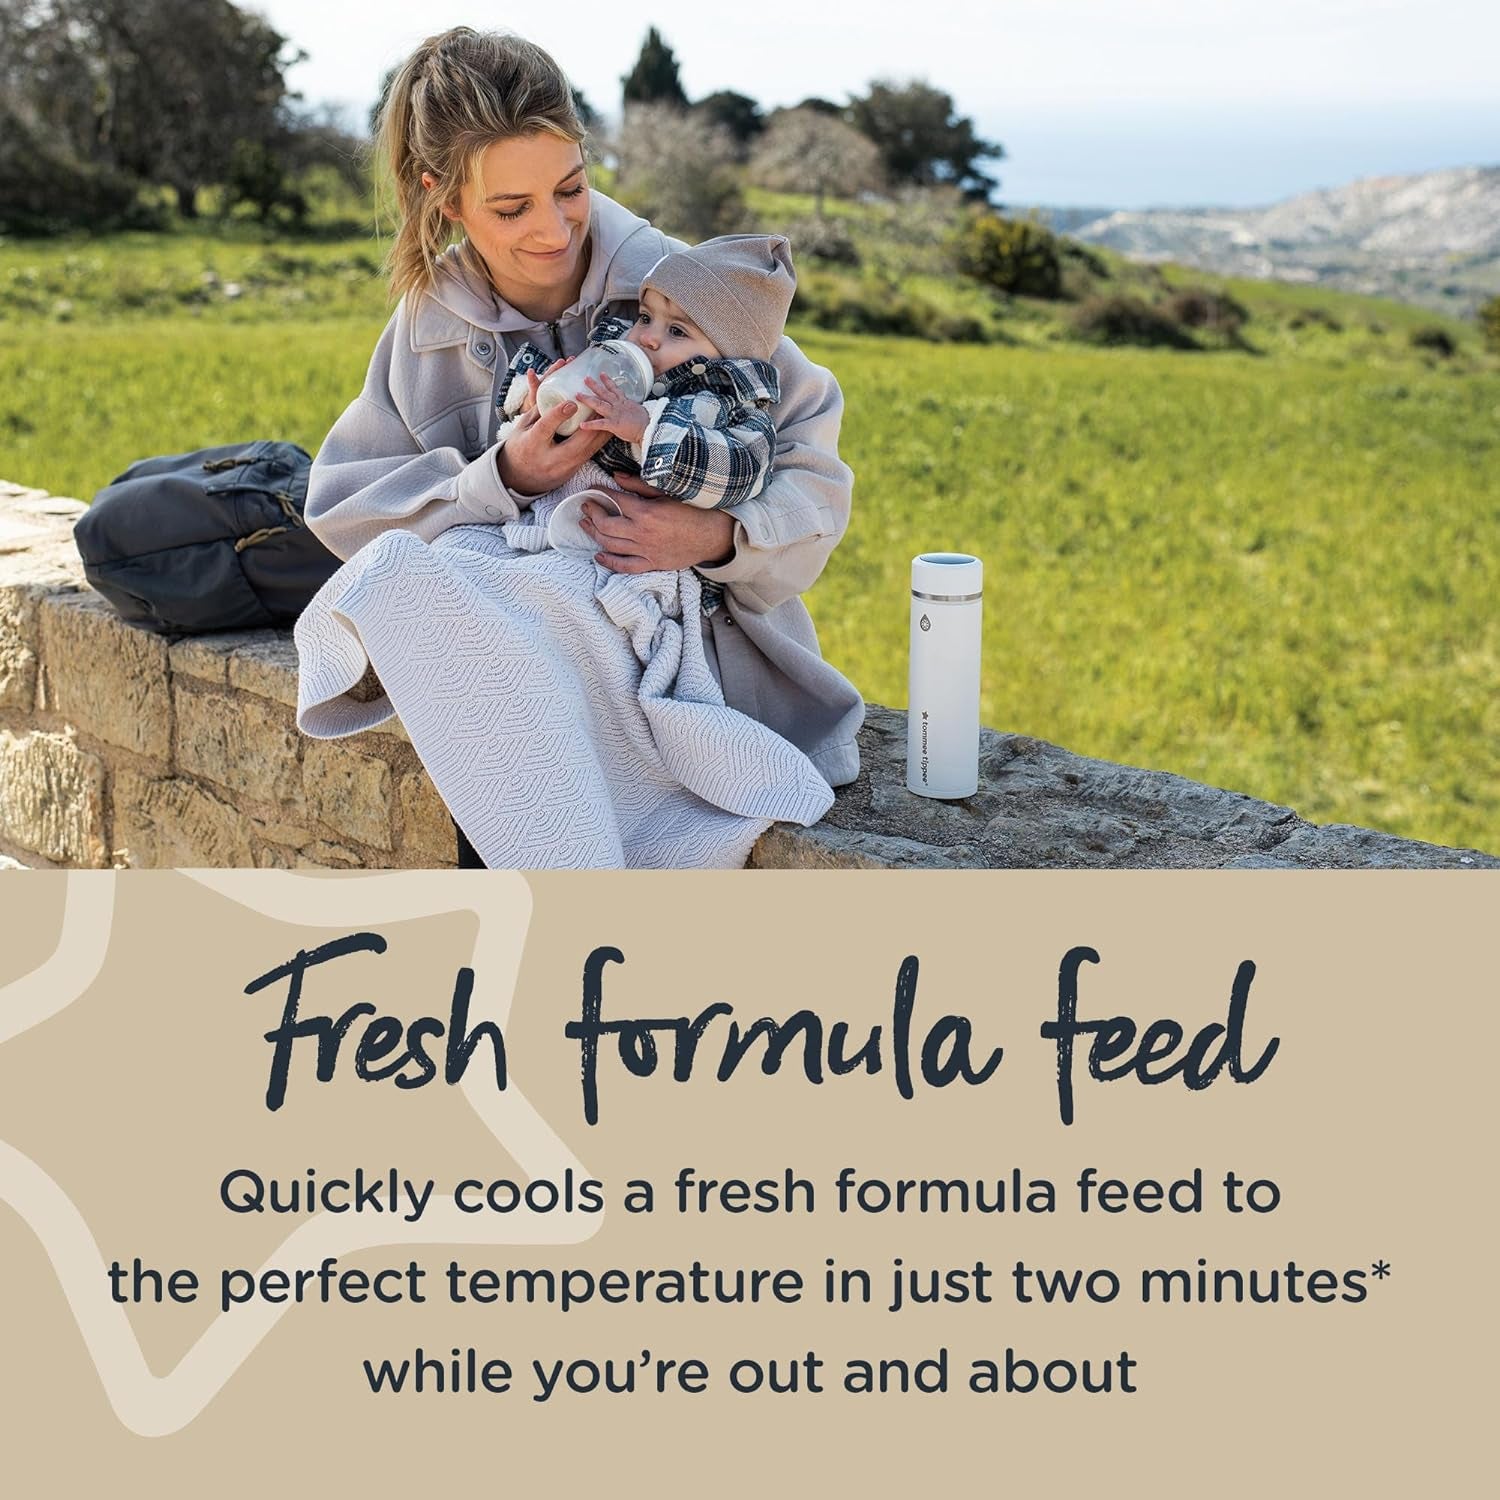 Goprep Formula Feed Maker Set, Prepares the Perfect Formula Baby Bottle in 2 Minutes, Portable, Hot and Cool Flasks with LED Digital Temperature Display